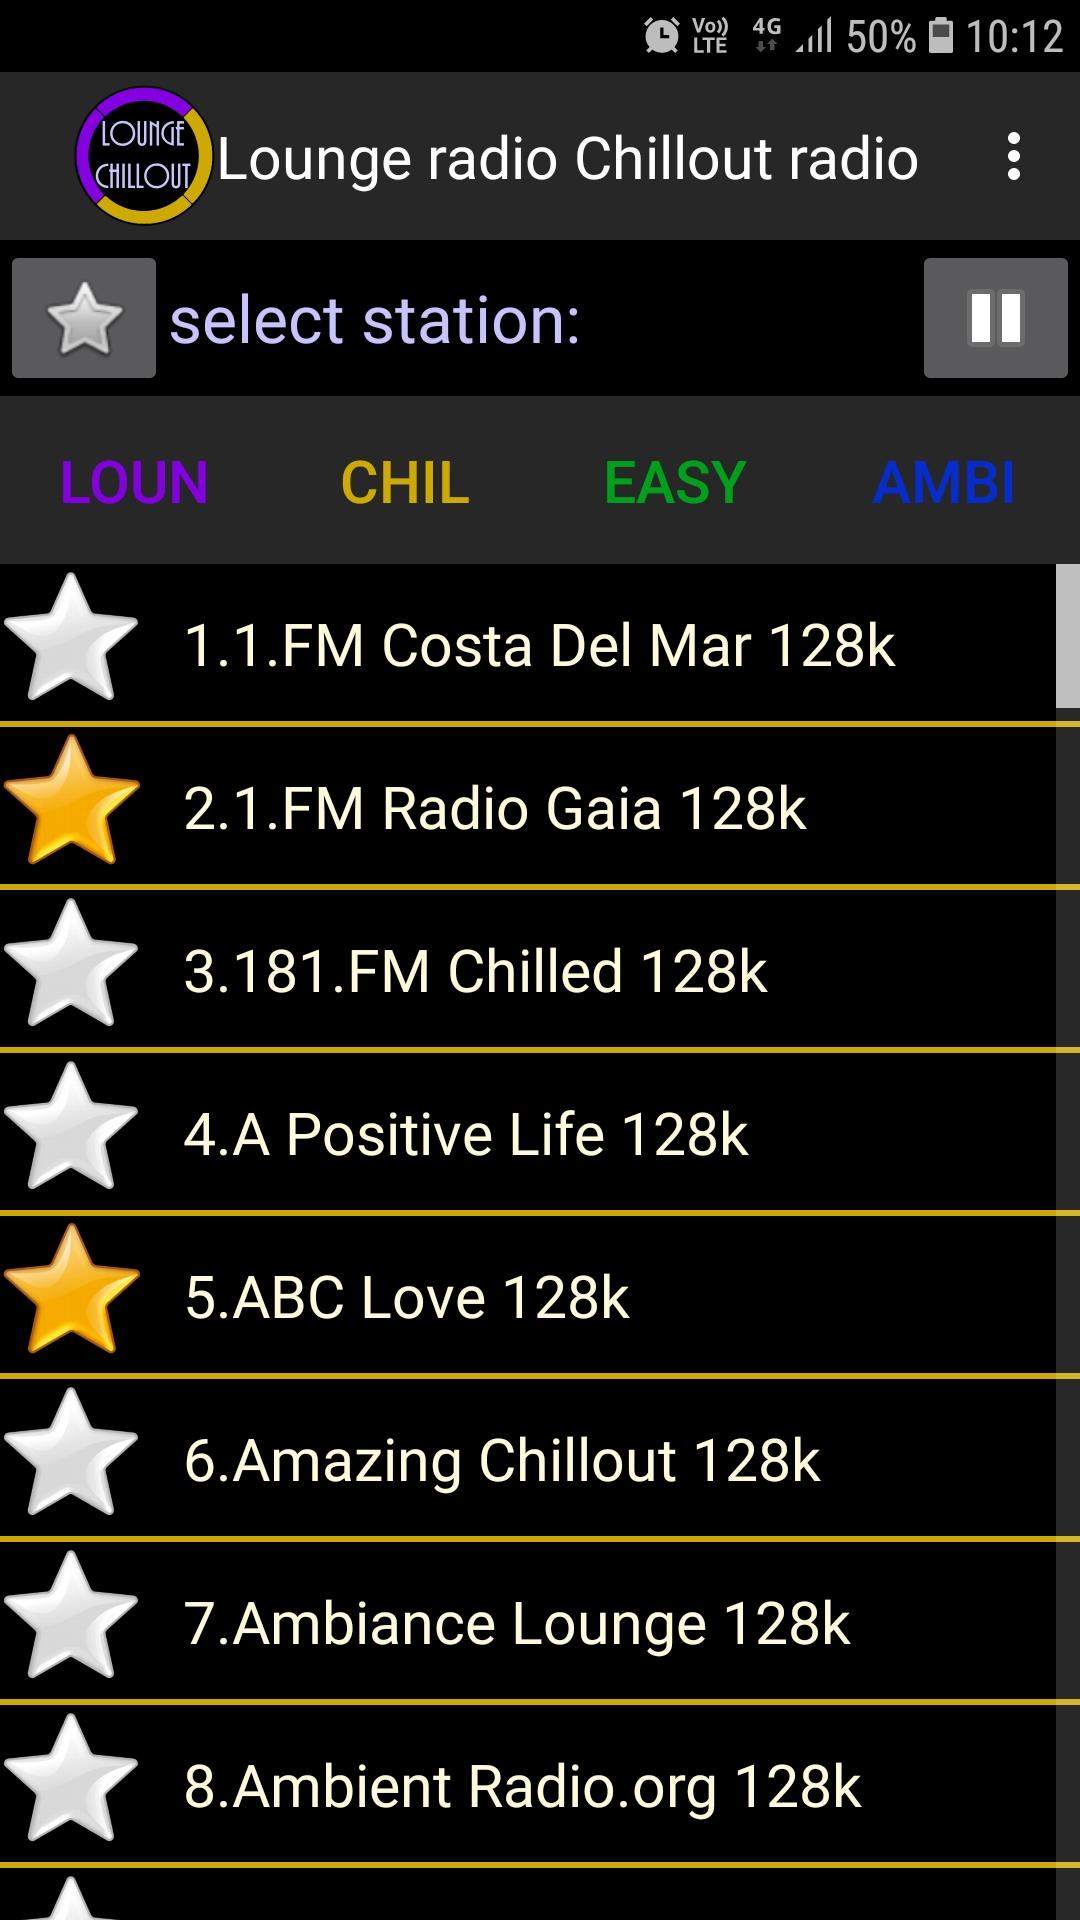 Lounge radio Chillout radio for Android - APK Download